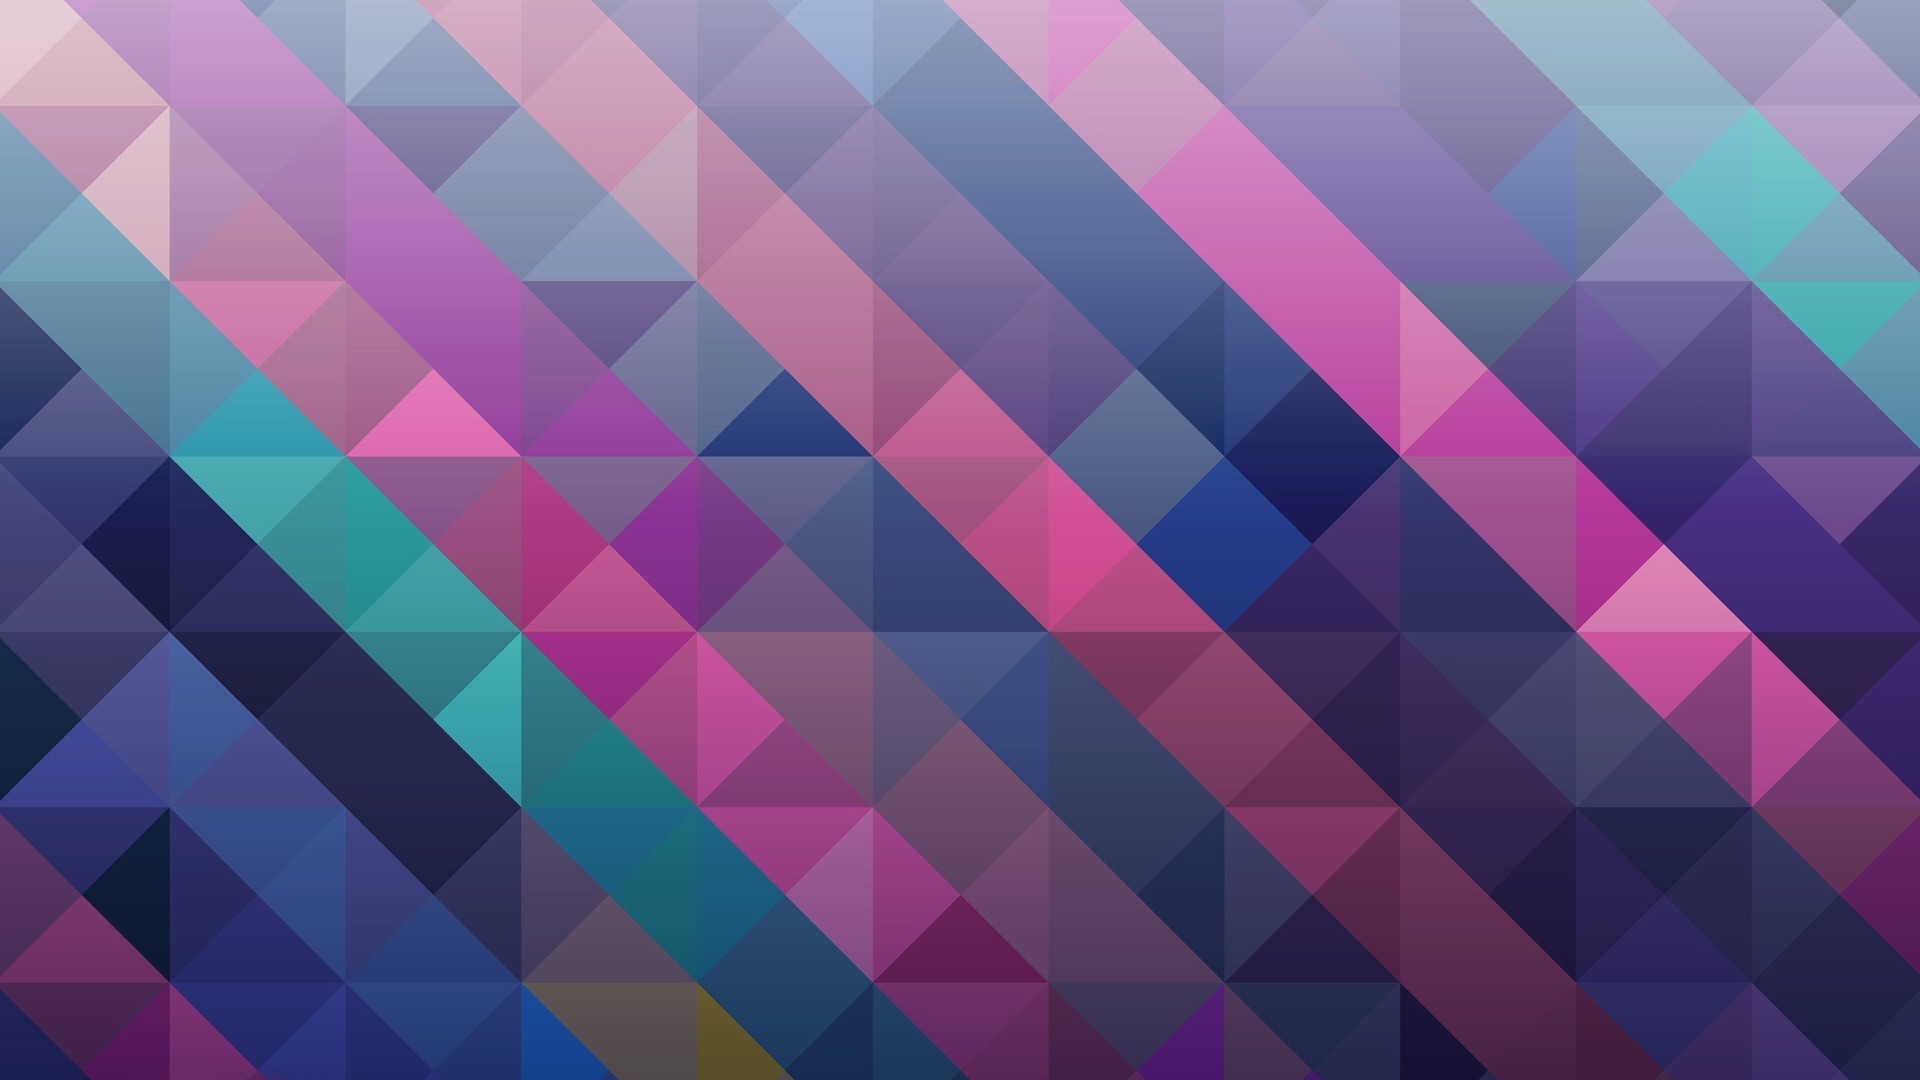 digital Art, Minimalism, Abstract, Pattern, Geometry, Triangle, Square, Colorful, Lines, Mosaic Wallpaper